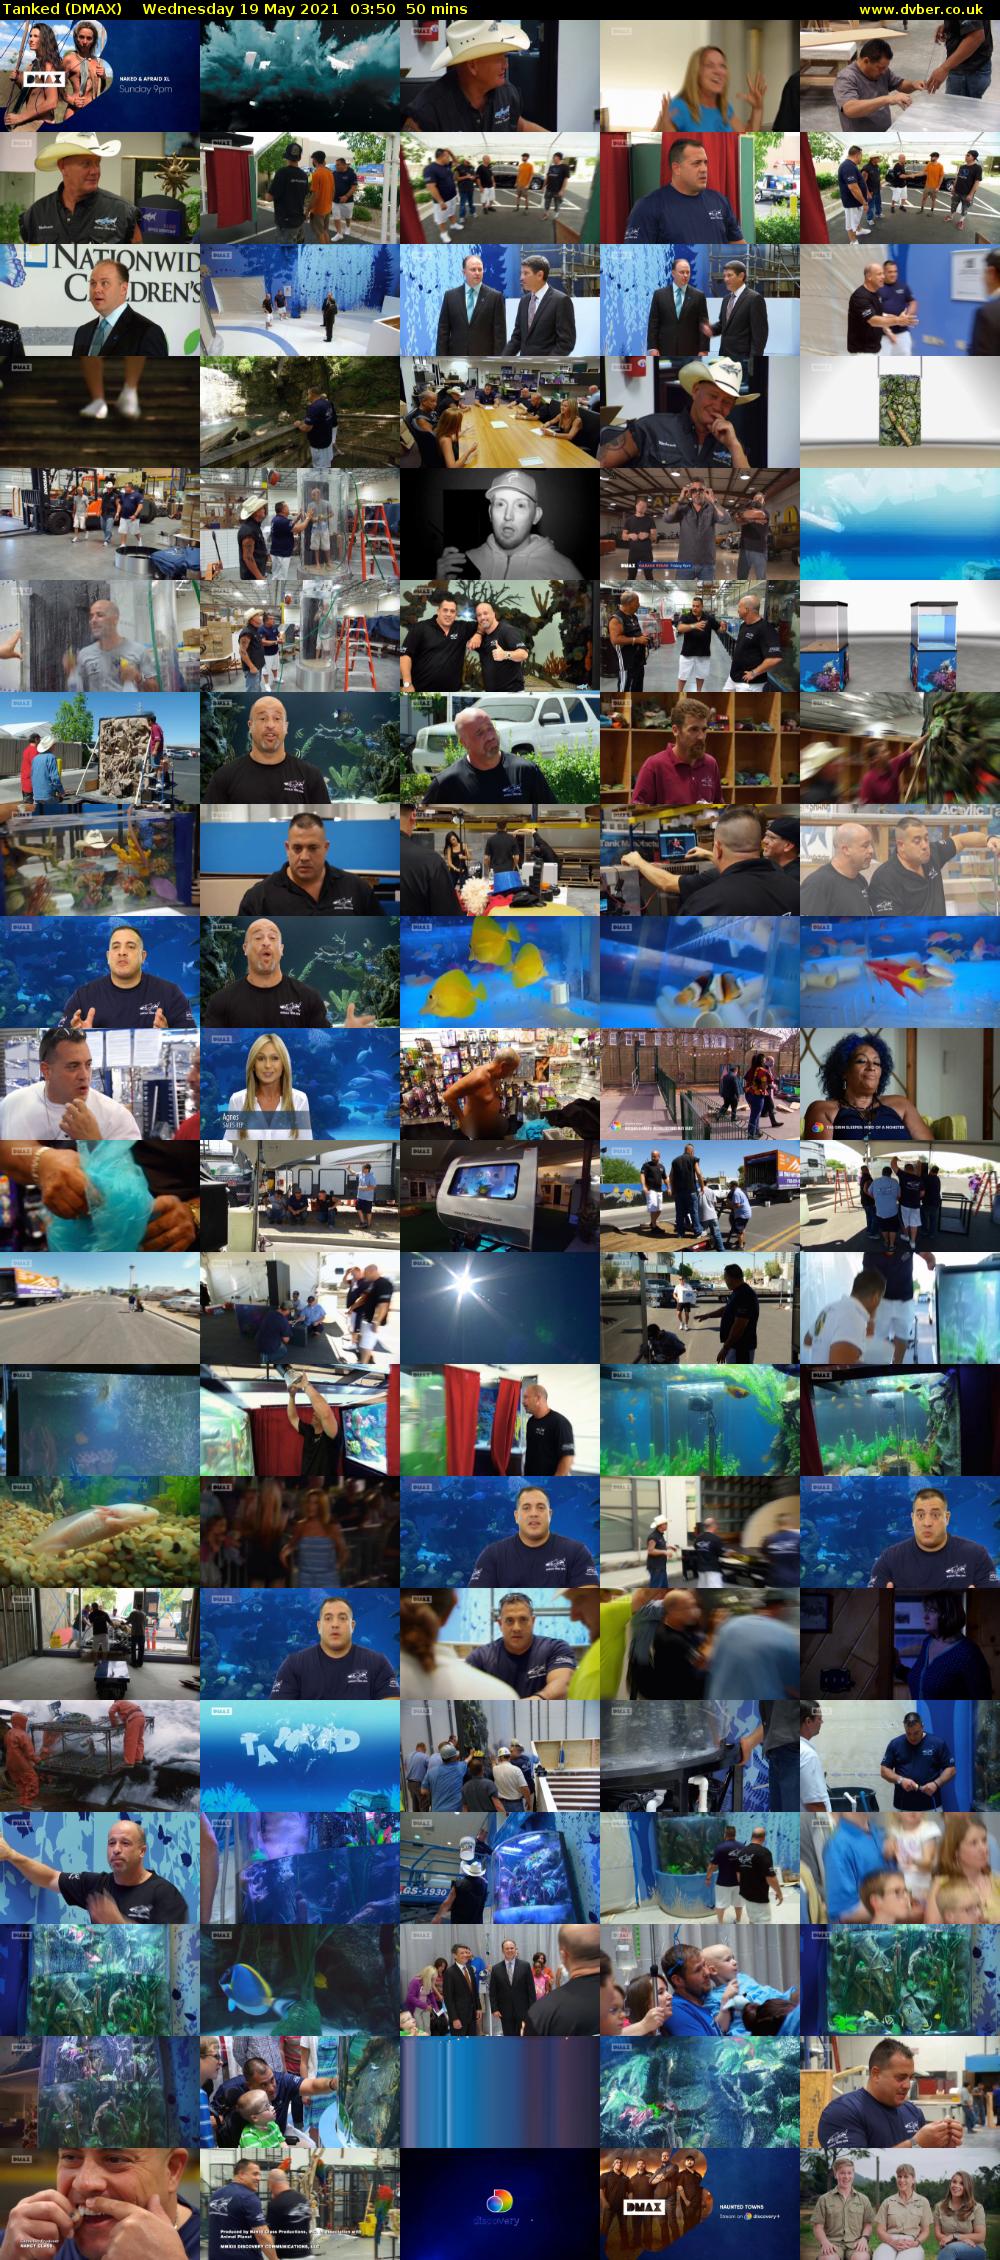 Tanked (DMAX) Wednesday 19 May 2021 03:50 - 04:40